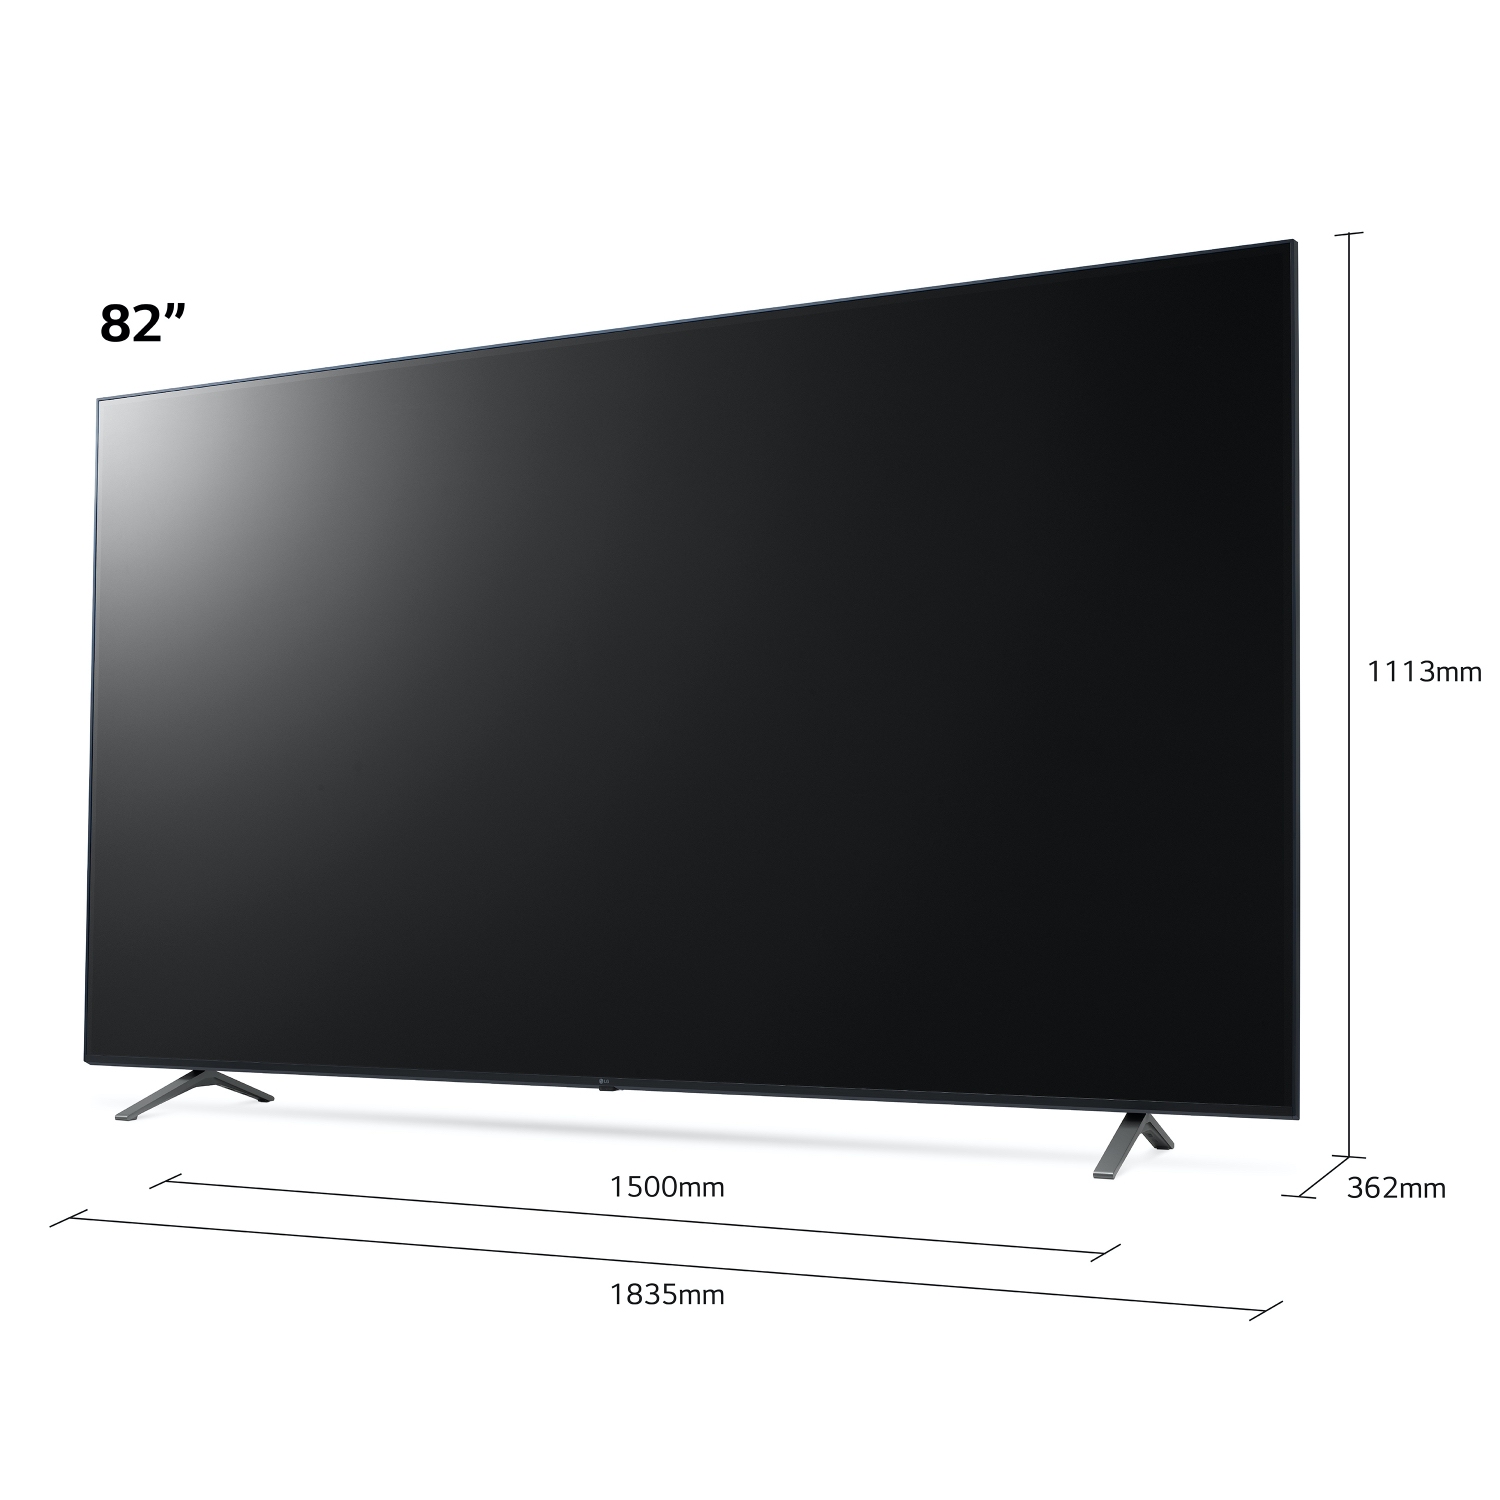 LG 82UP80006LA 82" 4K UHD LED Smart TV with Freeview Play - 4